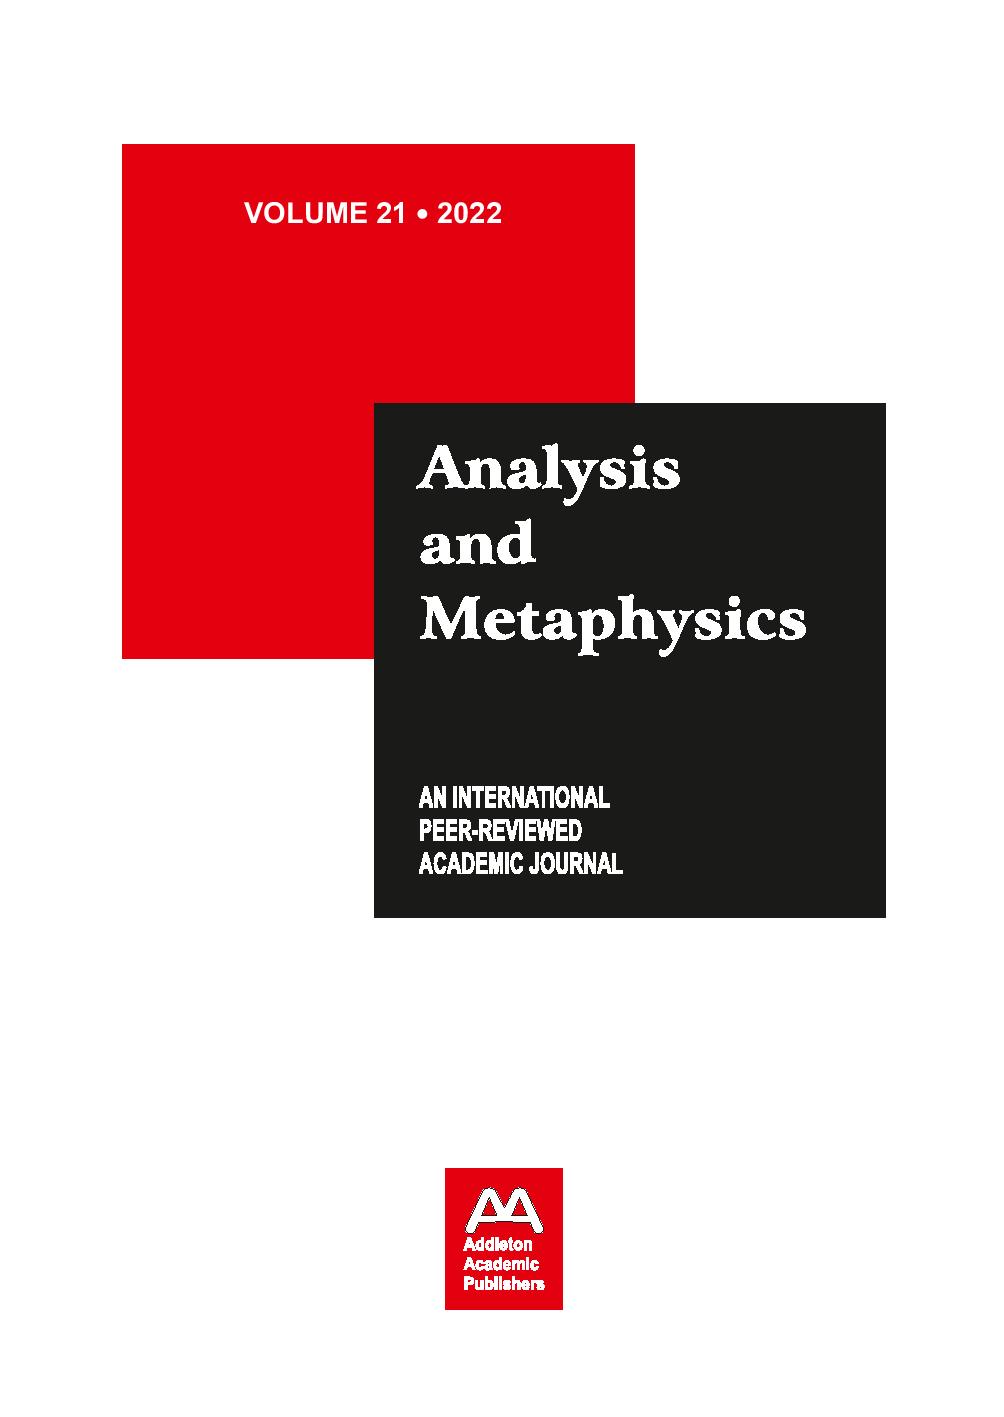 Perception and Cognition Algorithms, Simulation Modeling and Data Visualization Tools, and Spatial Computing and Immersive Technologies in the Metaverse Interactive Environment Cover Image